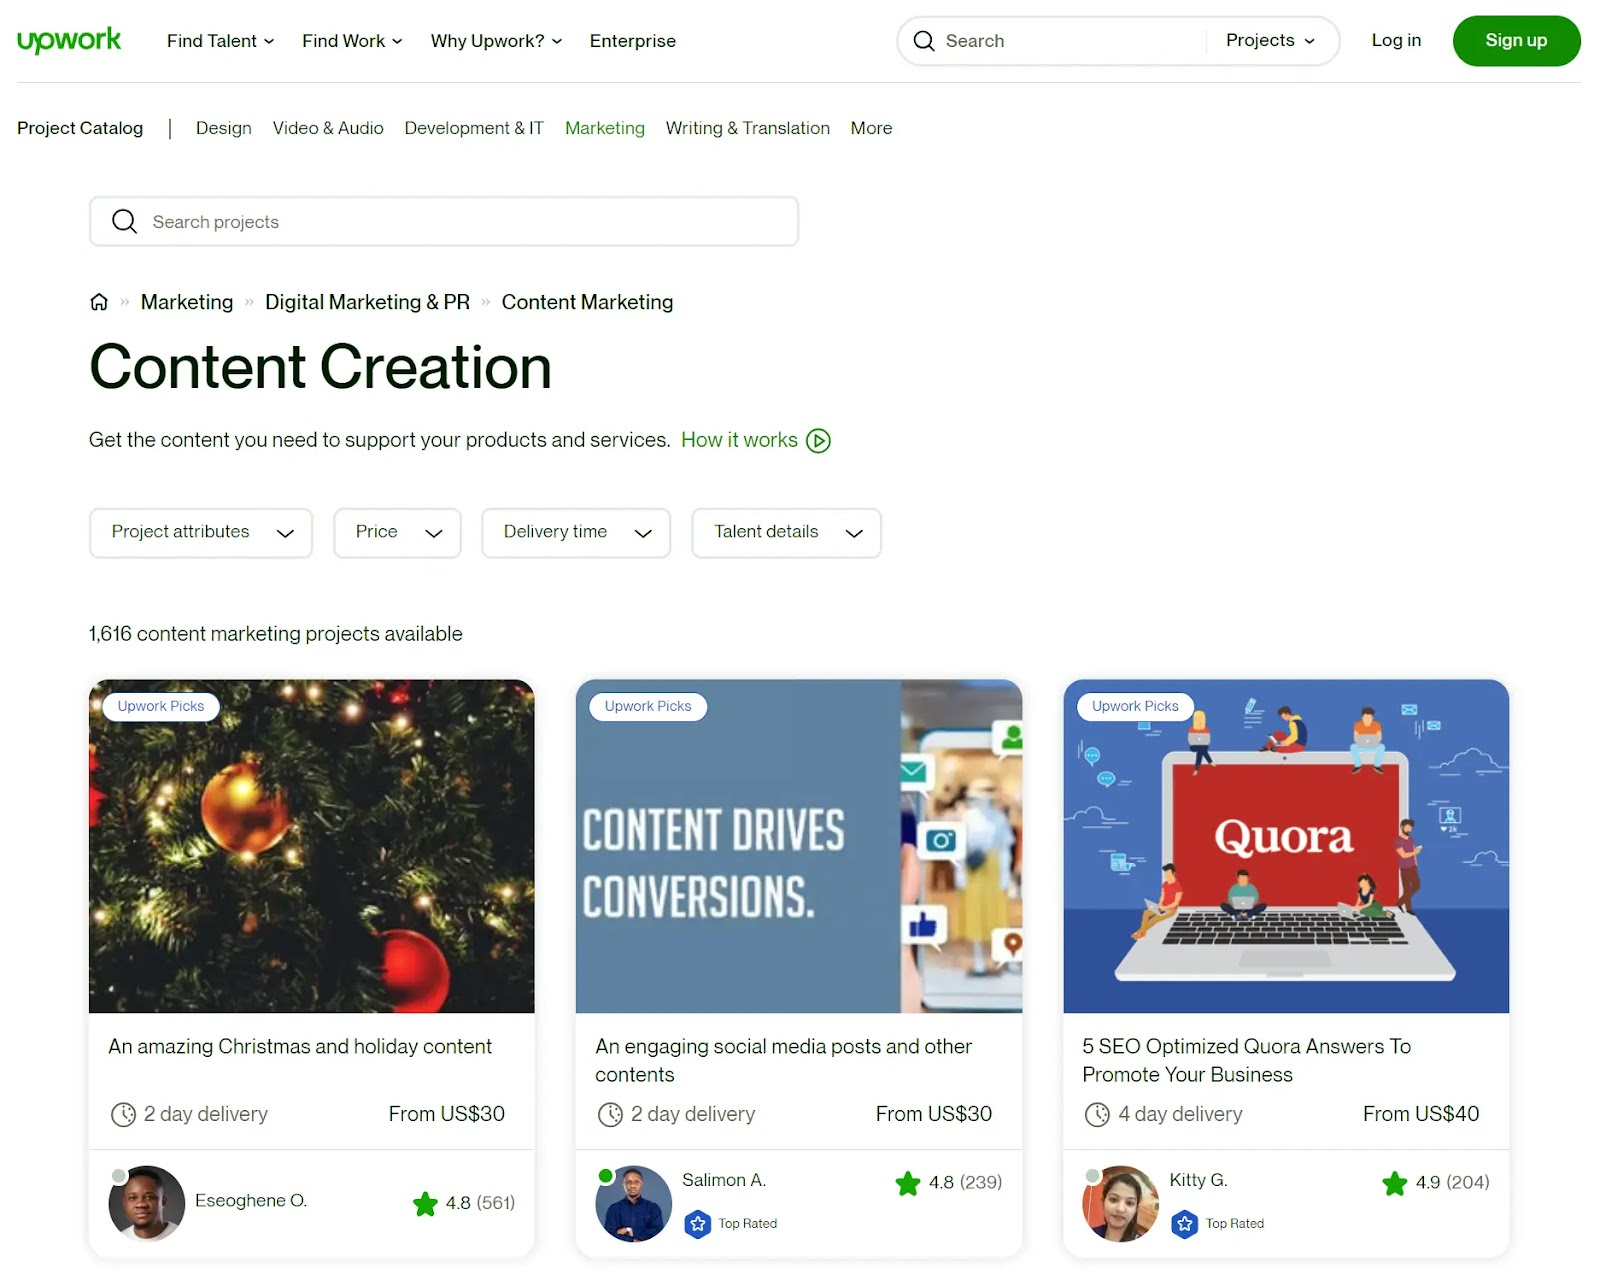 "Content Creation" results connected  Upwork